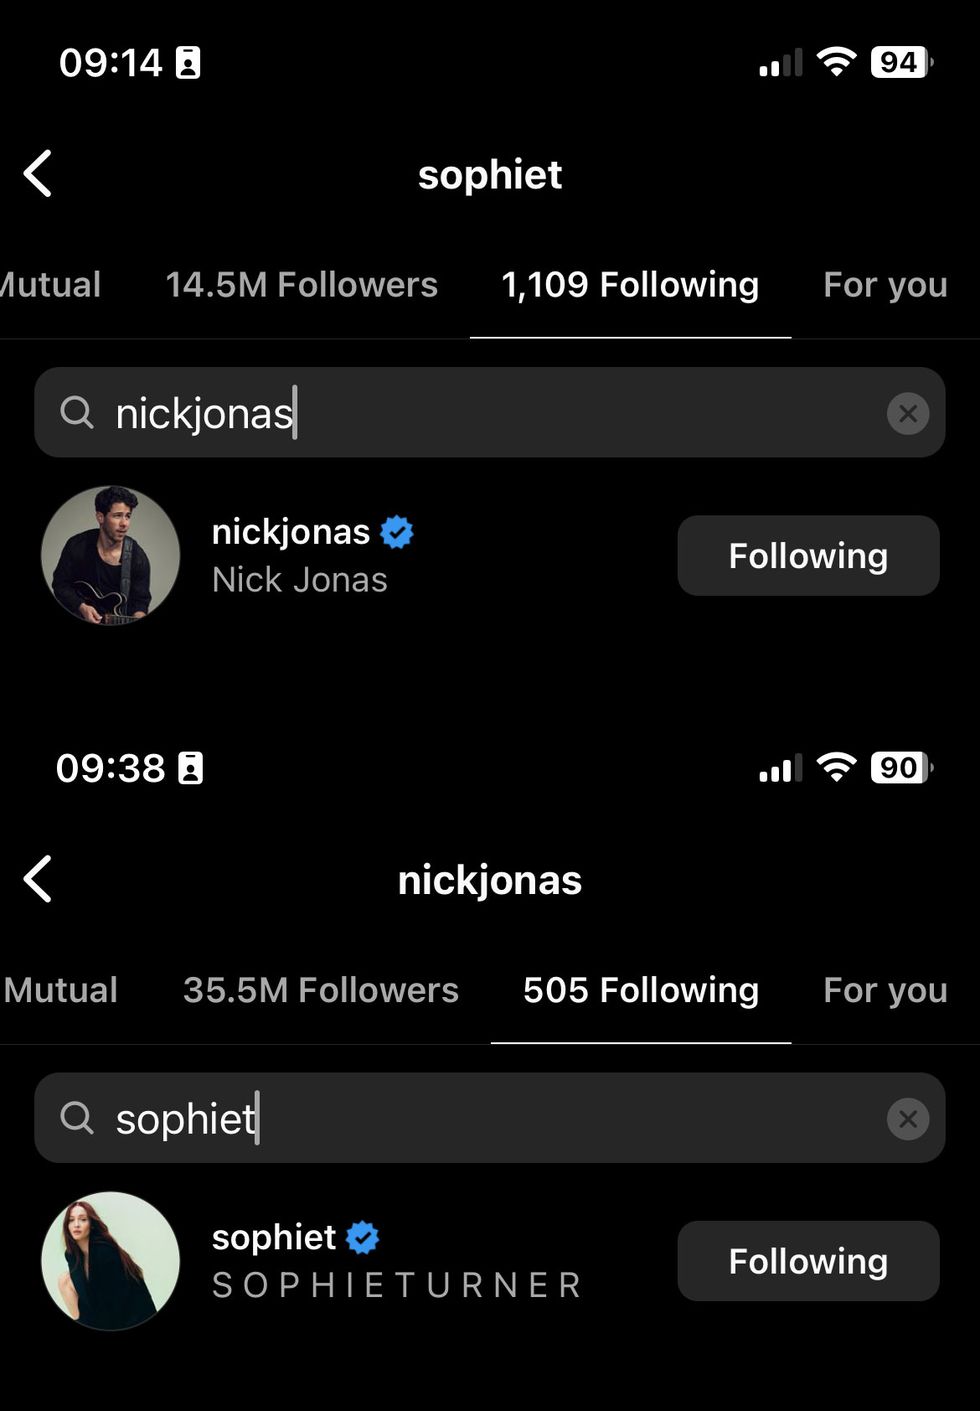 nick jonas and sophie turner still following each other as of october 13 at 930 am